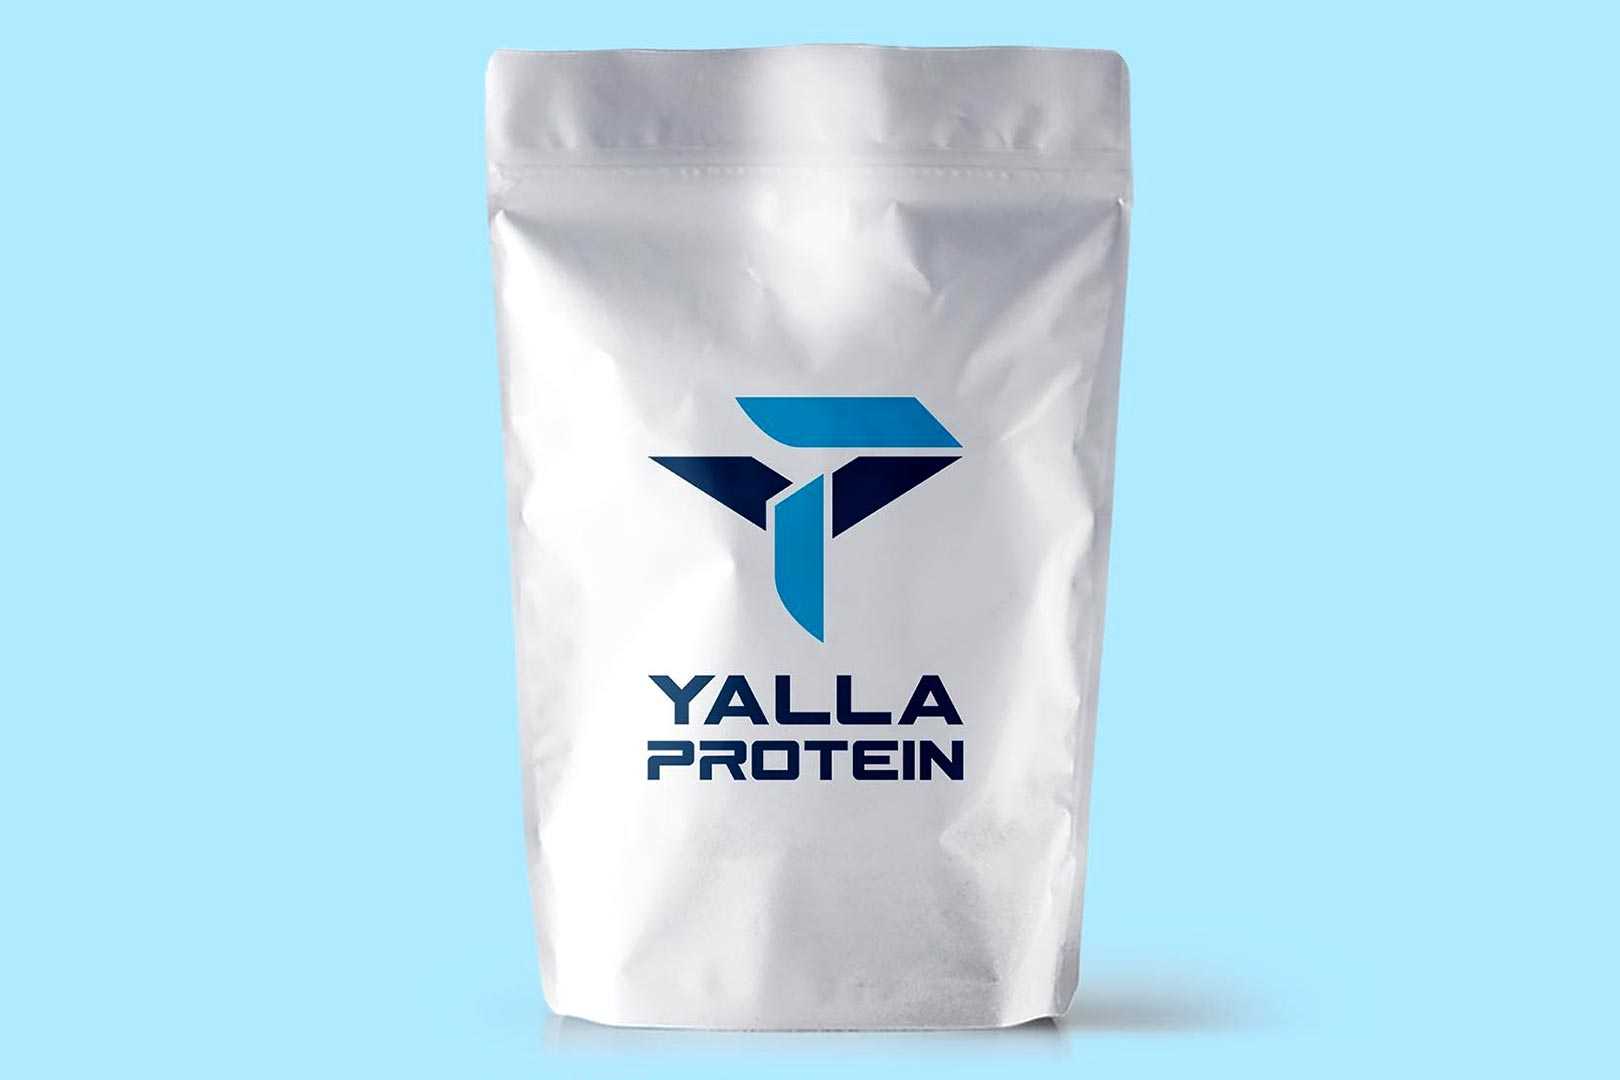 Yalla Protein Crowdfunding For Its Own Facility